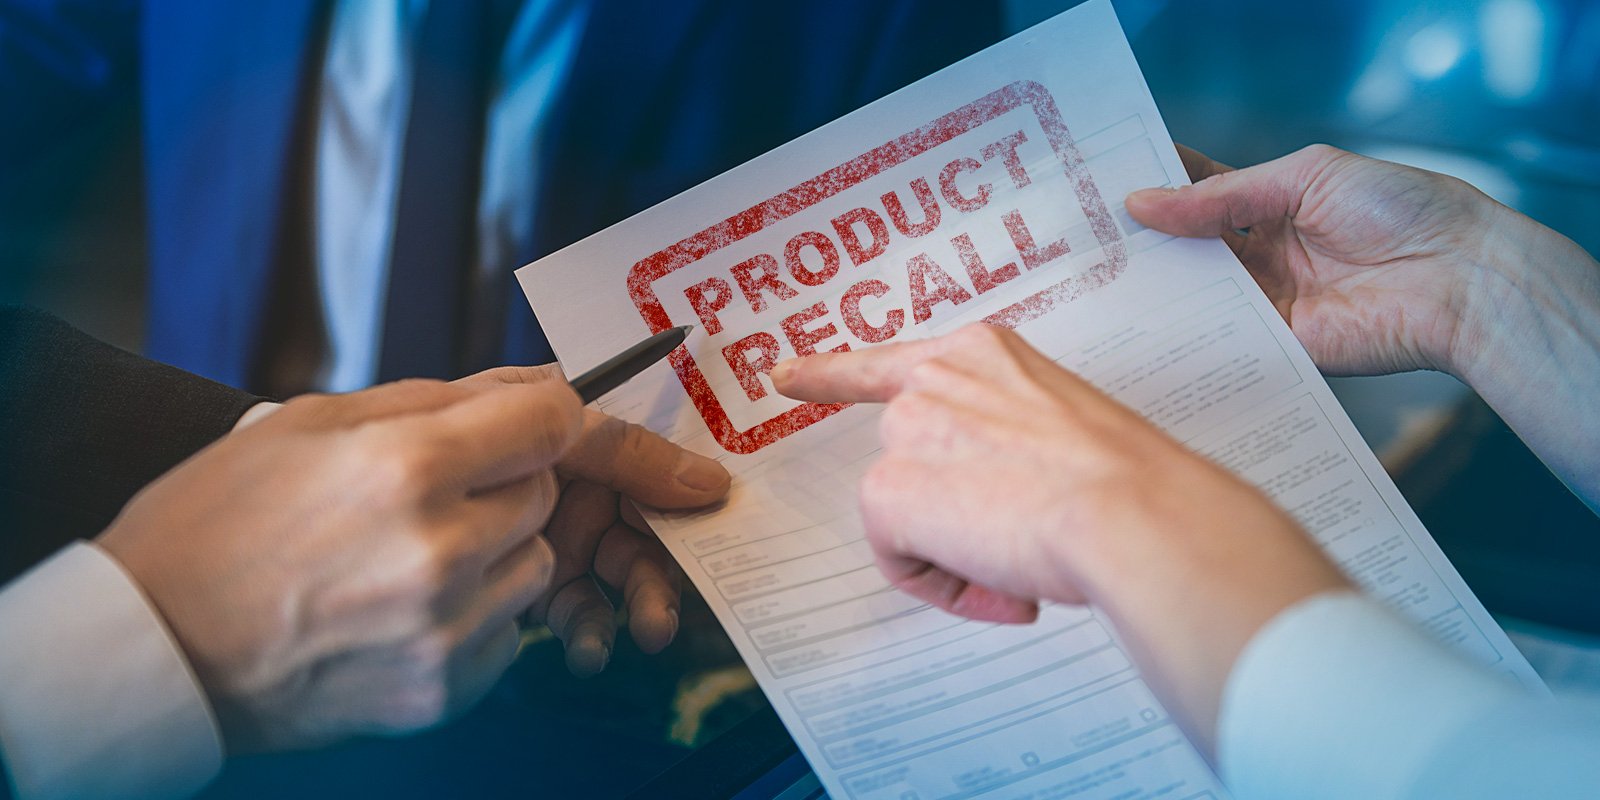 How To Conduct A Product Recall